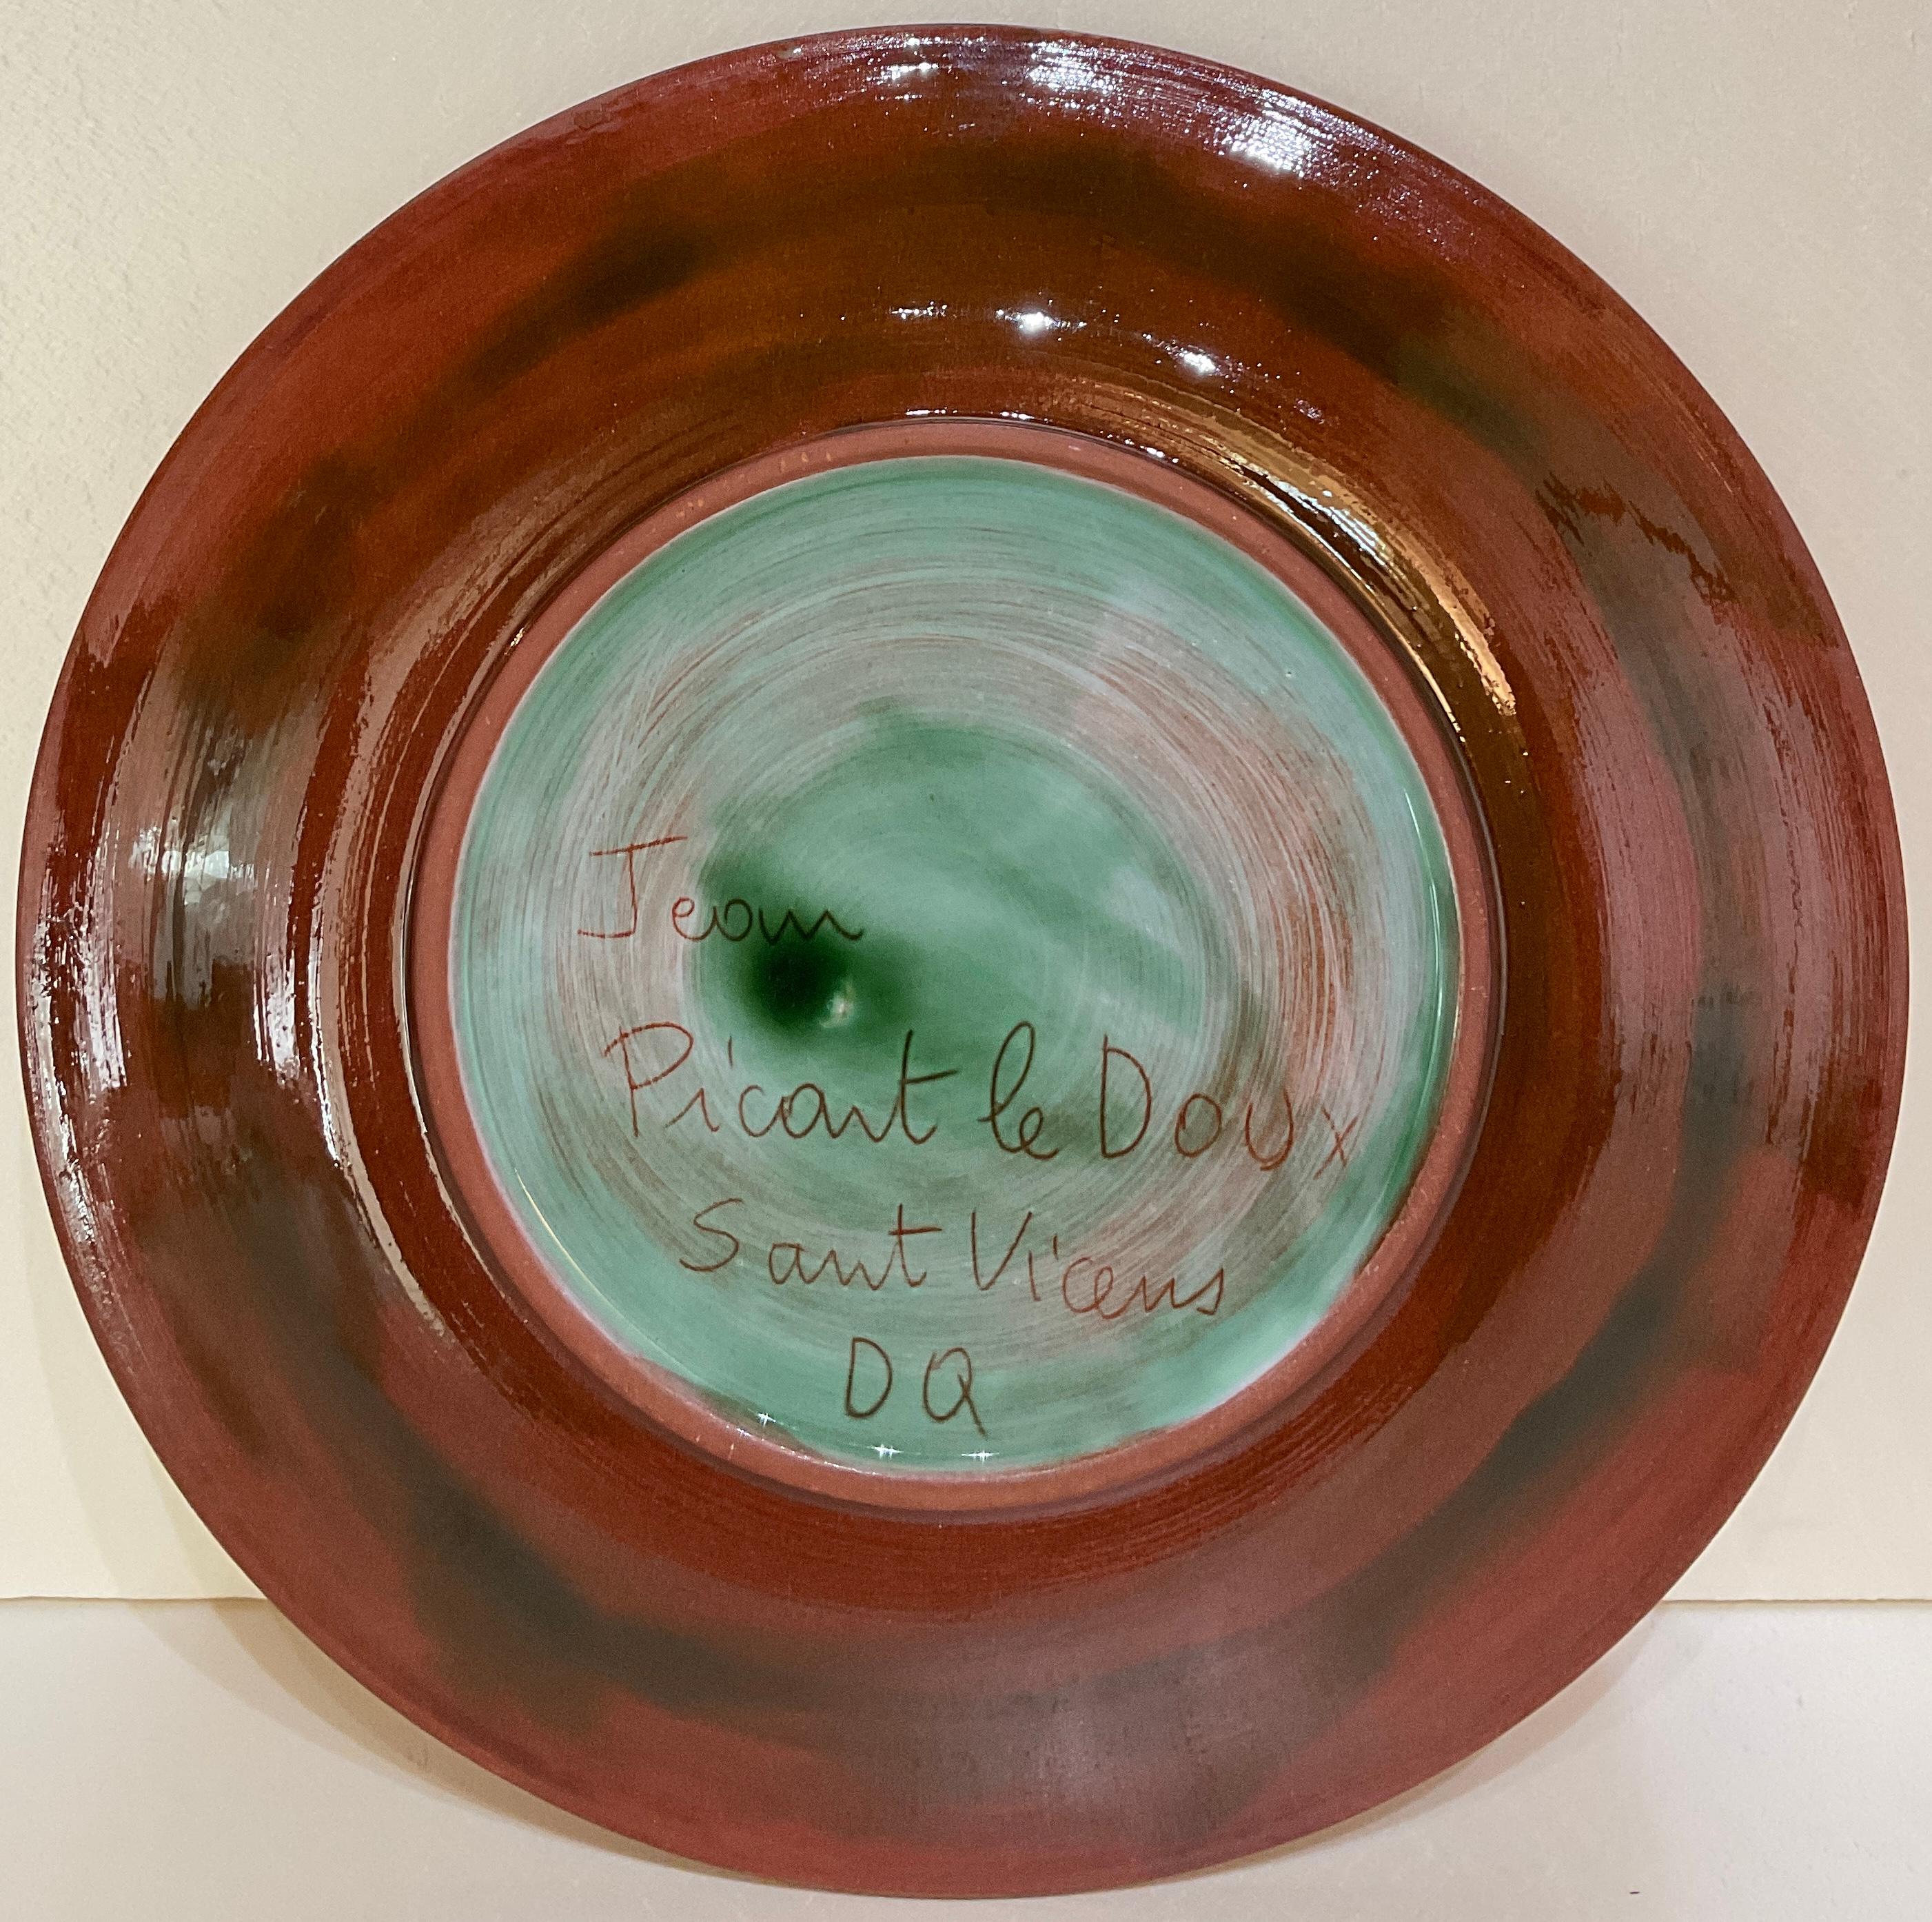 French mid-century ceramic bowl by Jean Picart Le Doux, France, 1950s. 
Glazed.

Very colorful and pleasing to the eye. This beautiful handcrafted, hand painted bowl or dish will enhance any wall, table, shelf or countertop.

Measures: diameter 9